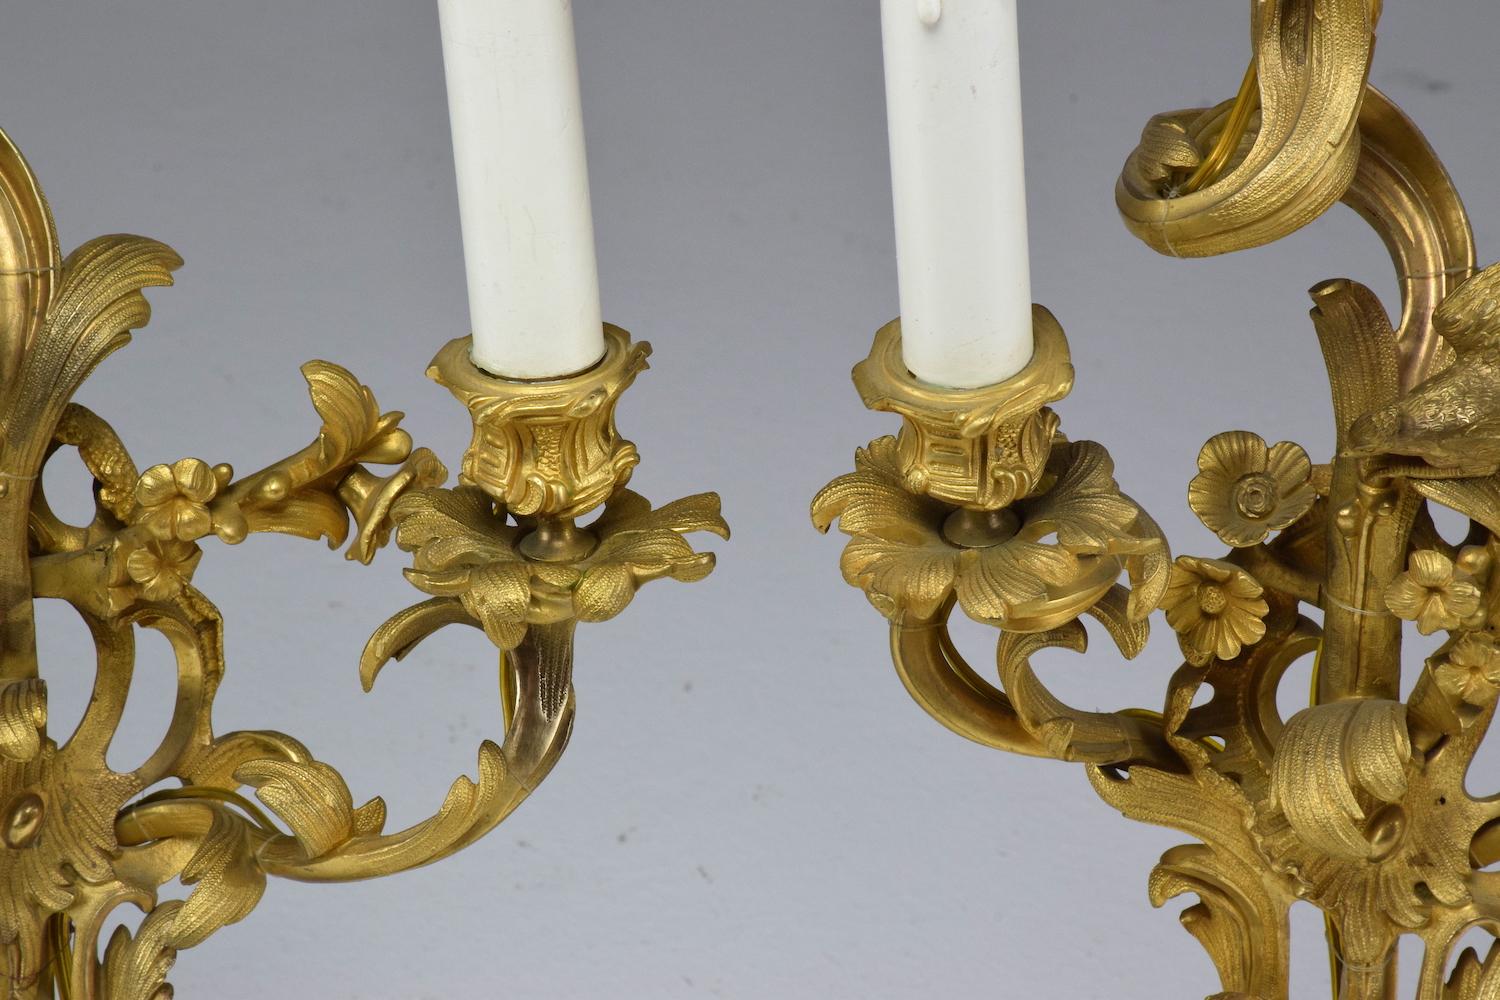  French Pair of Antique Louis VXI Ormolu Electrified Candelabras  12